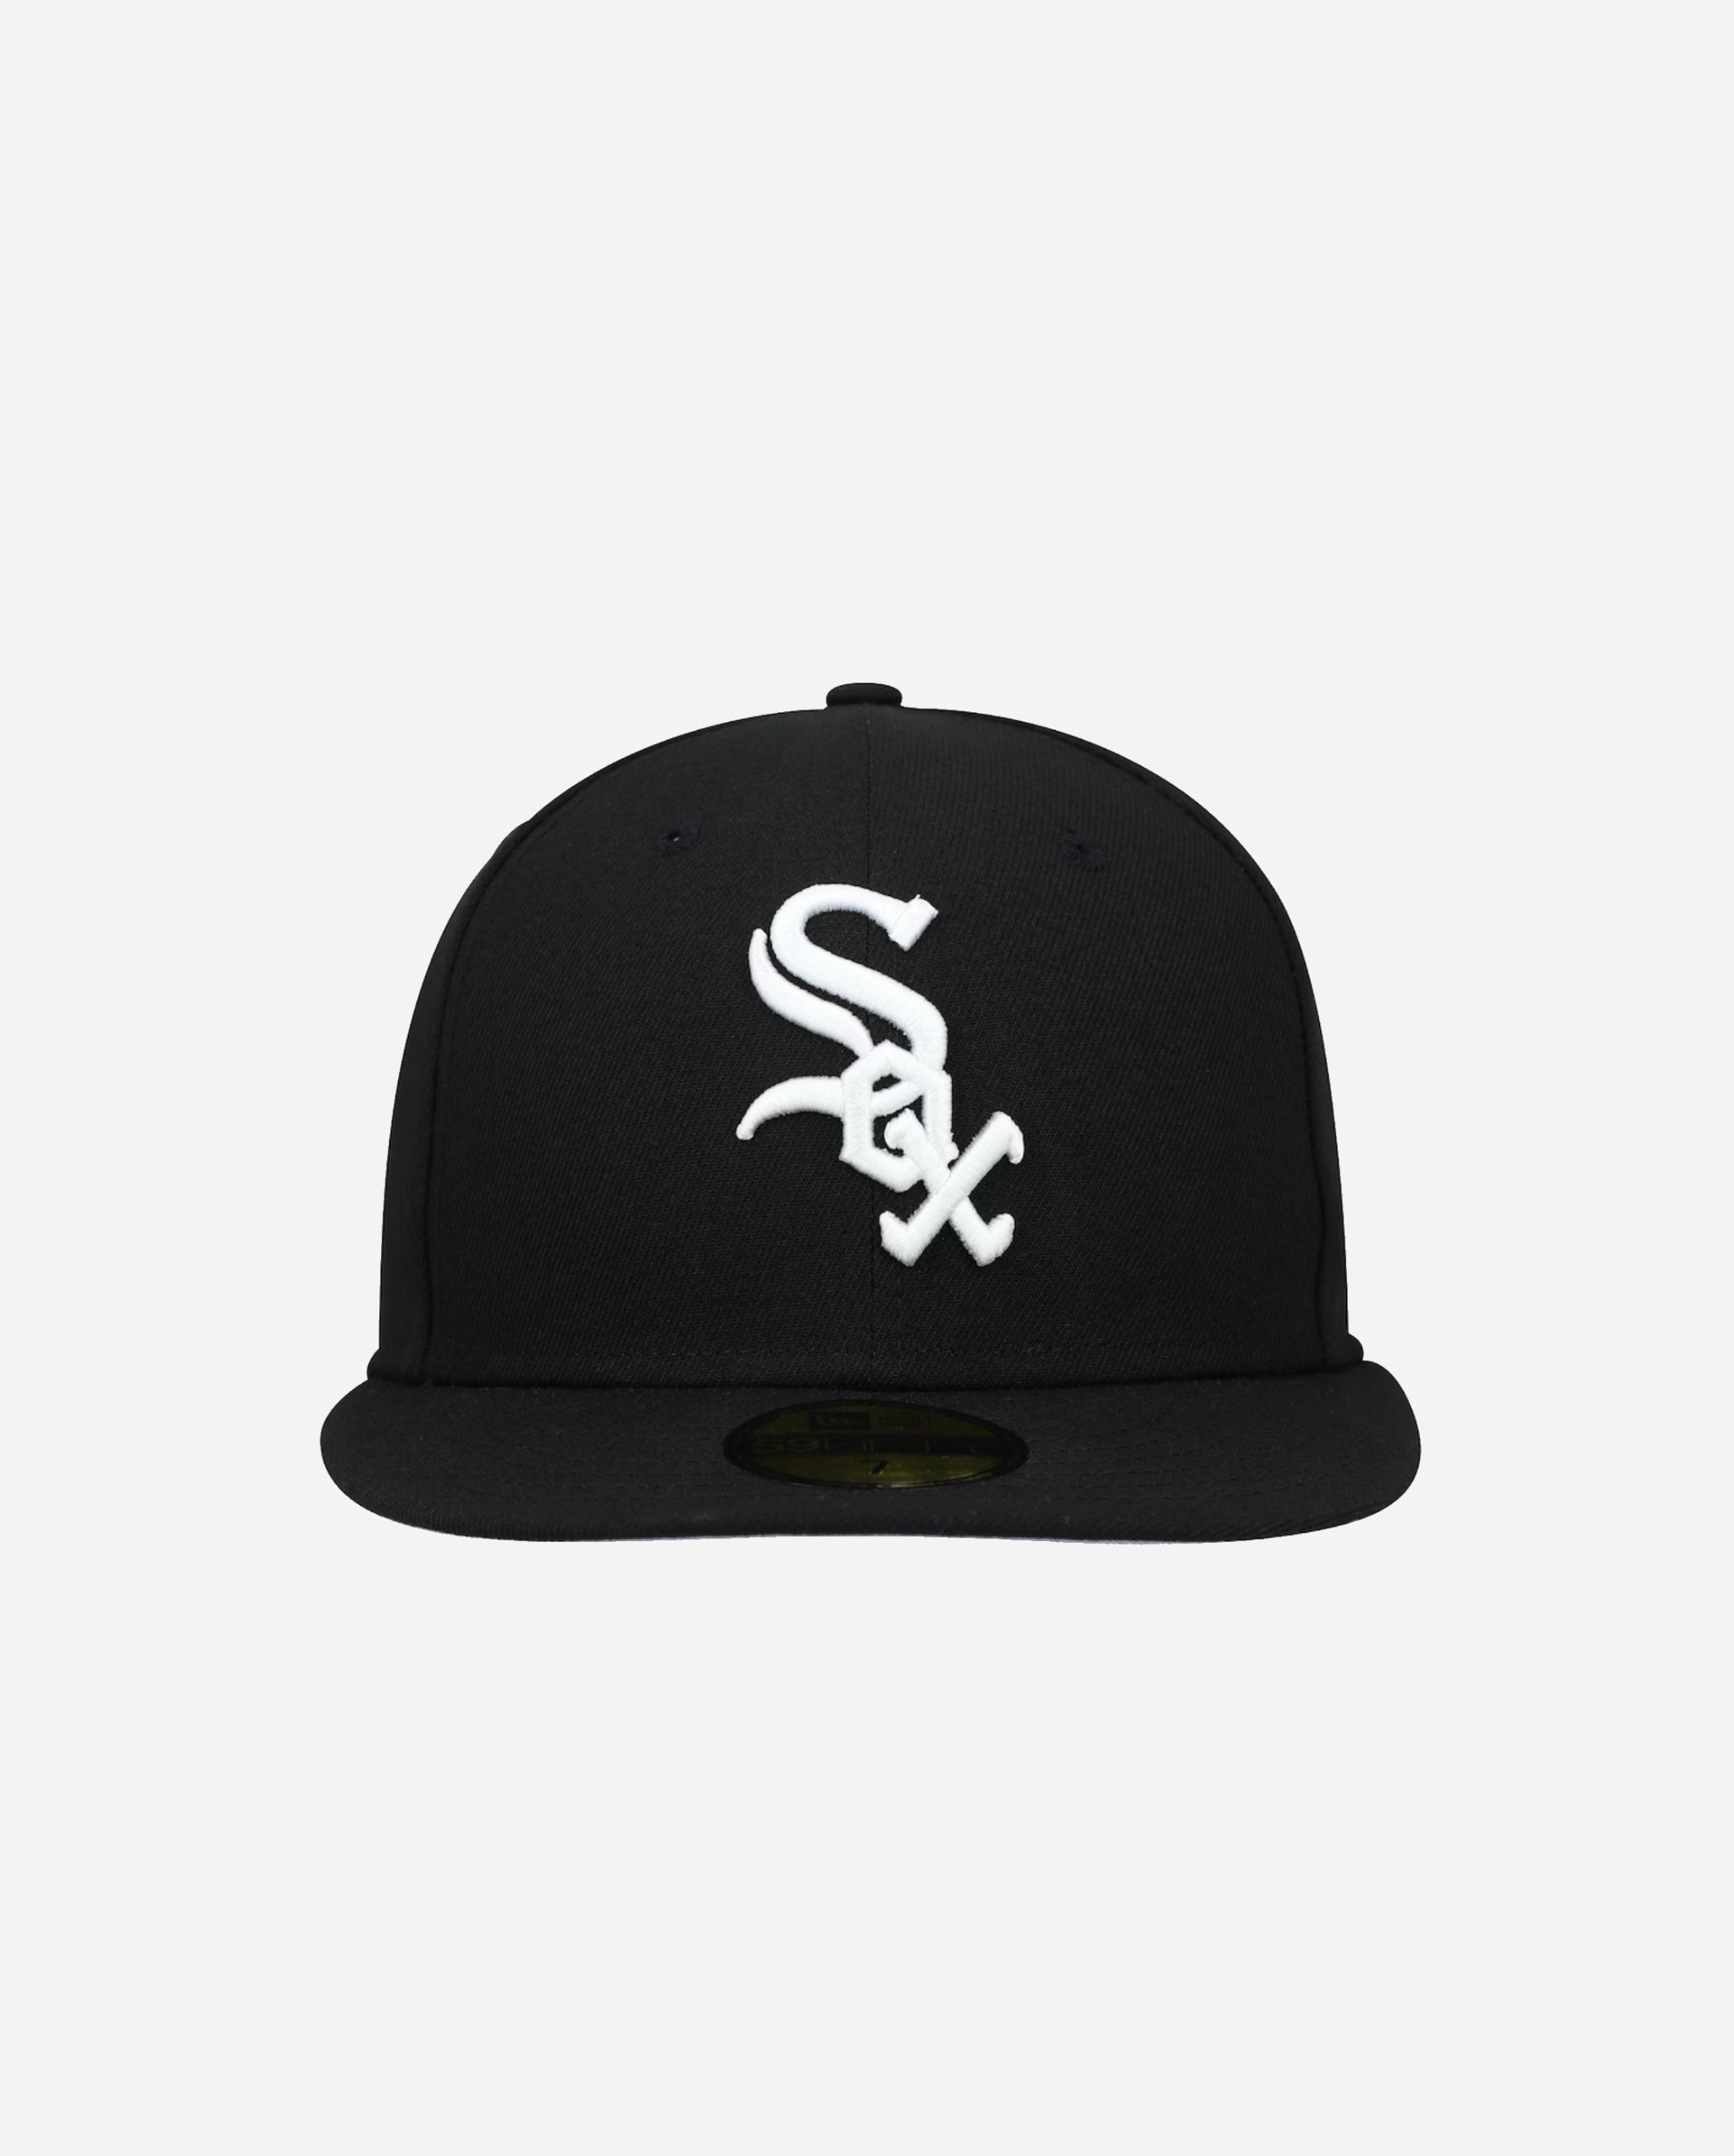 oMA CHICAGO WHITE SOX LOW PROFILE FITTED HAT (SAMPLE)